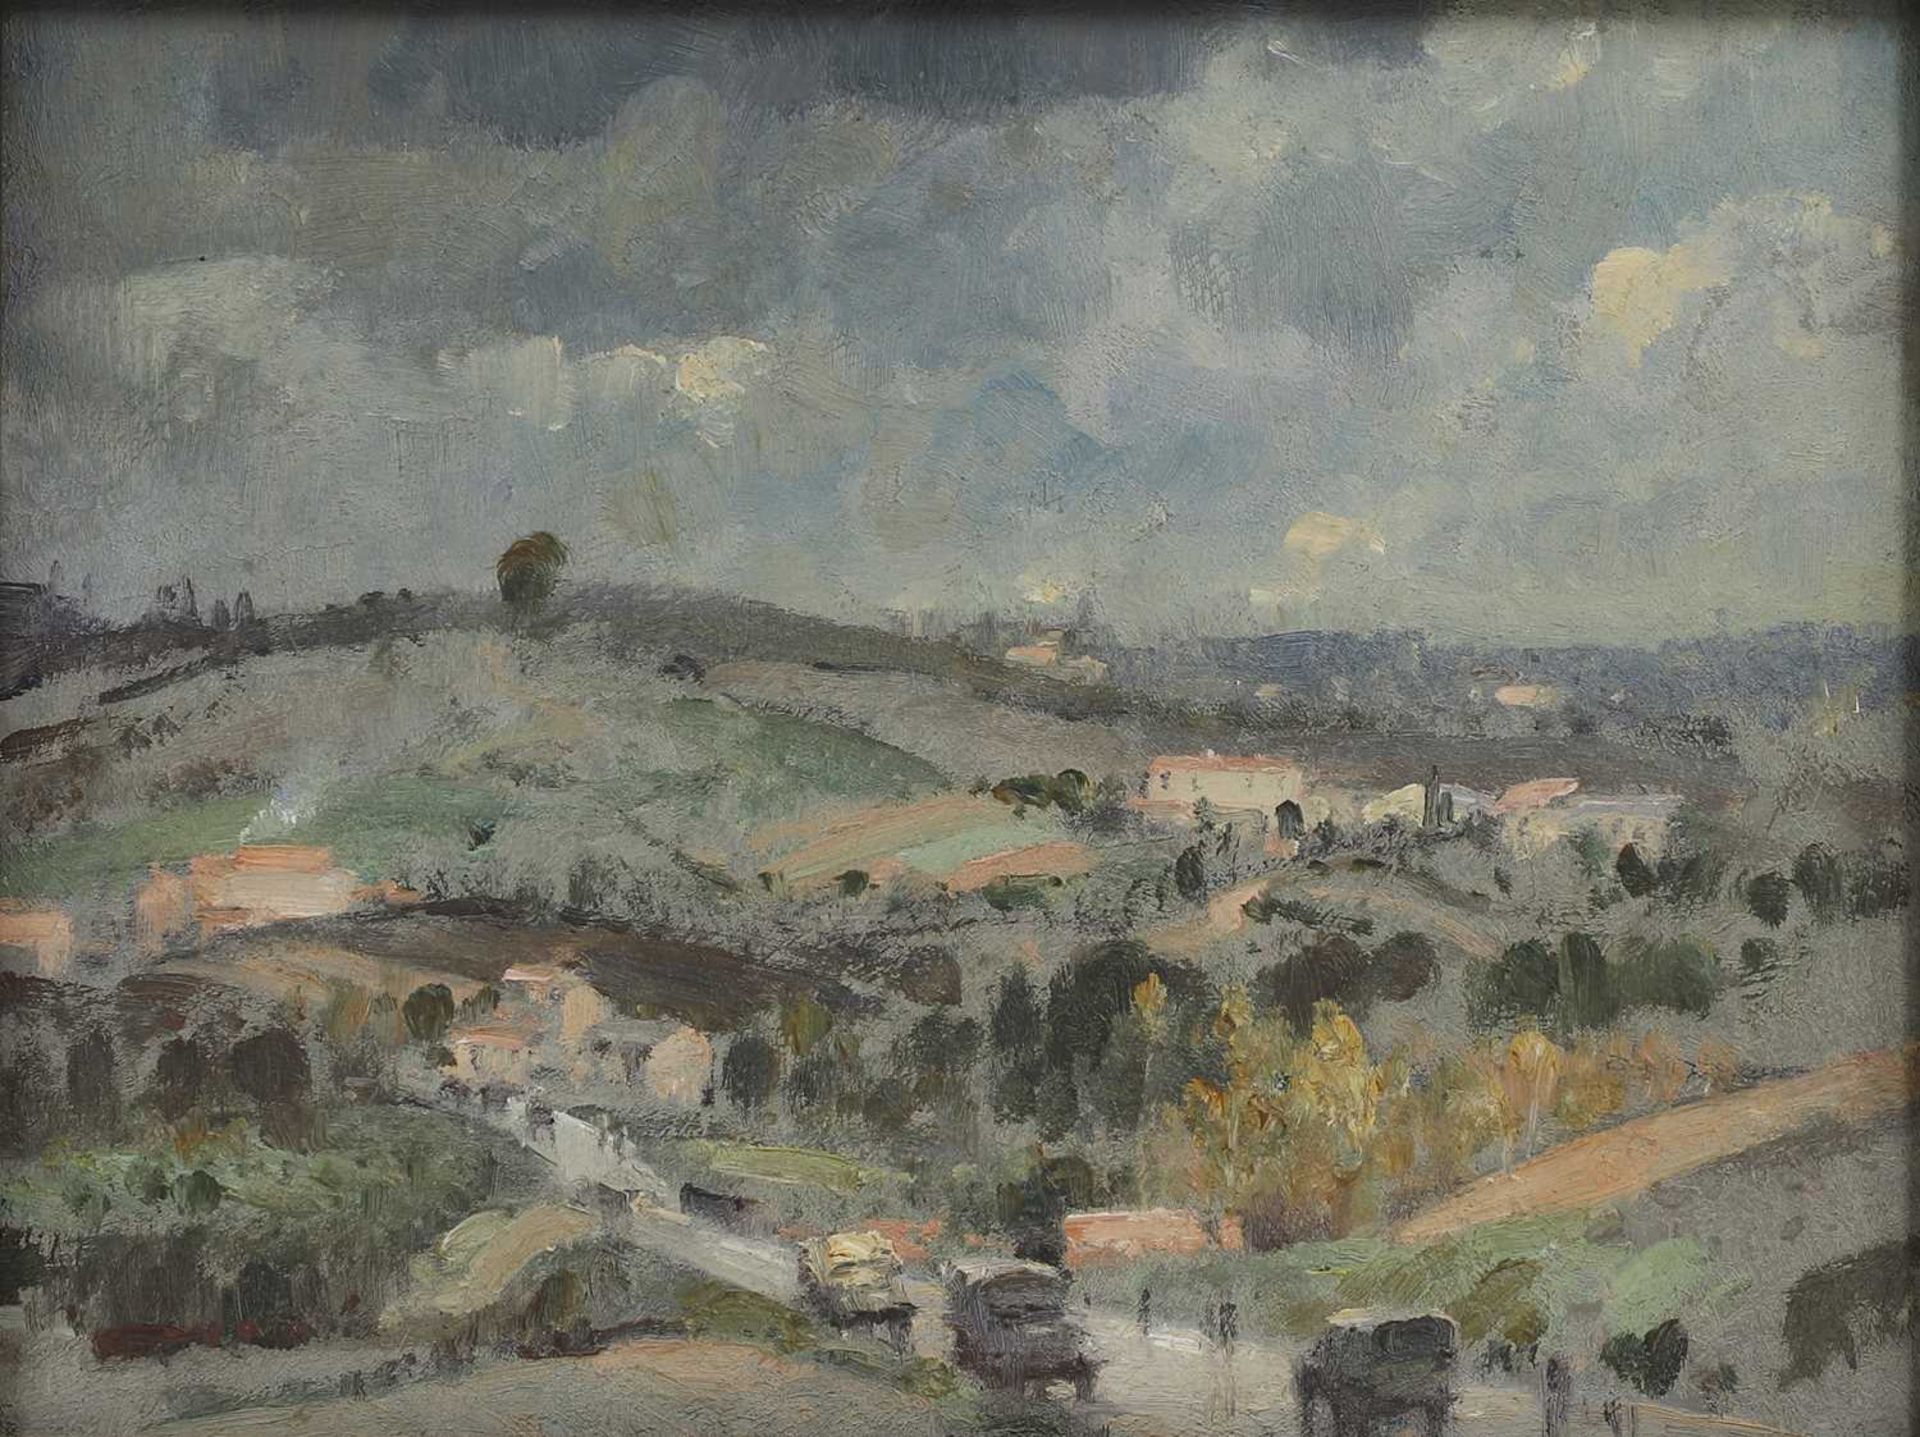 Attributed to Edward Seago (1910-1974)